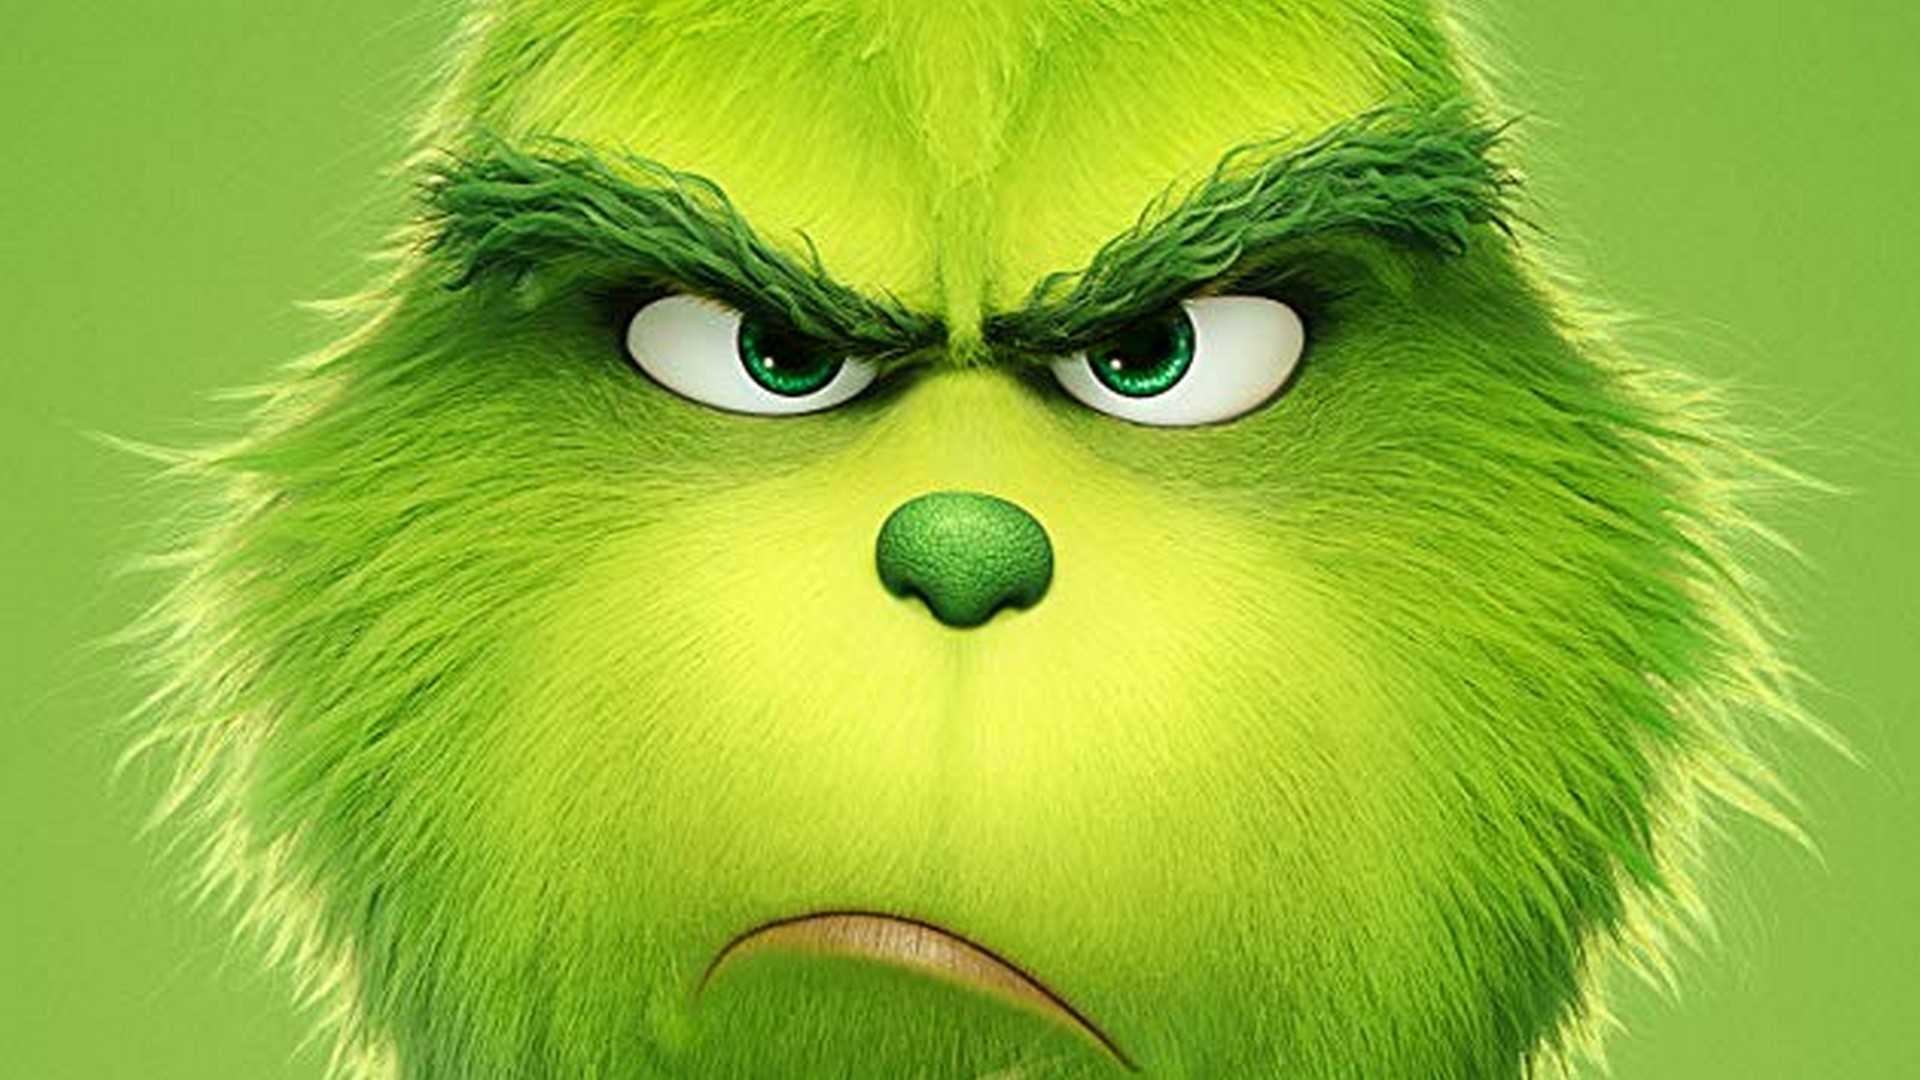 The Grinch 2018 Wallpaper HD with image resolution 1920x1080 pixel. You can make this wallpaper for your Desktop Computer Backgrounds, Mac Wallpapers, Android Lock screen or iPhone Screensavers